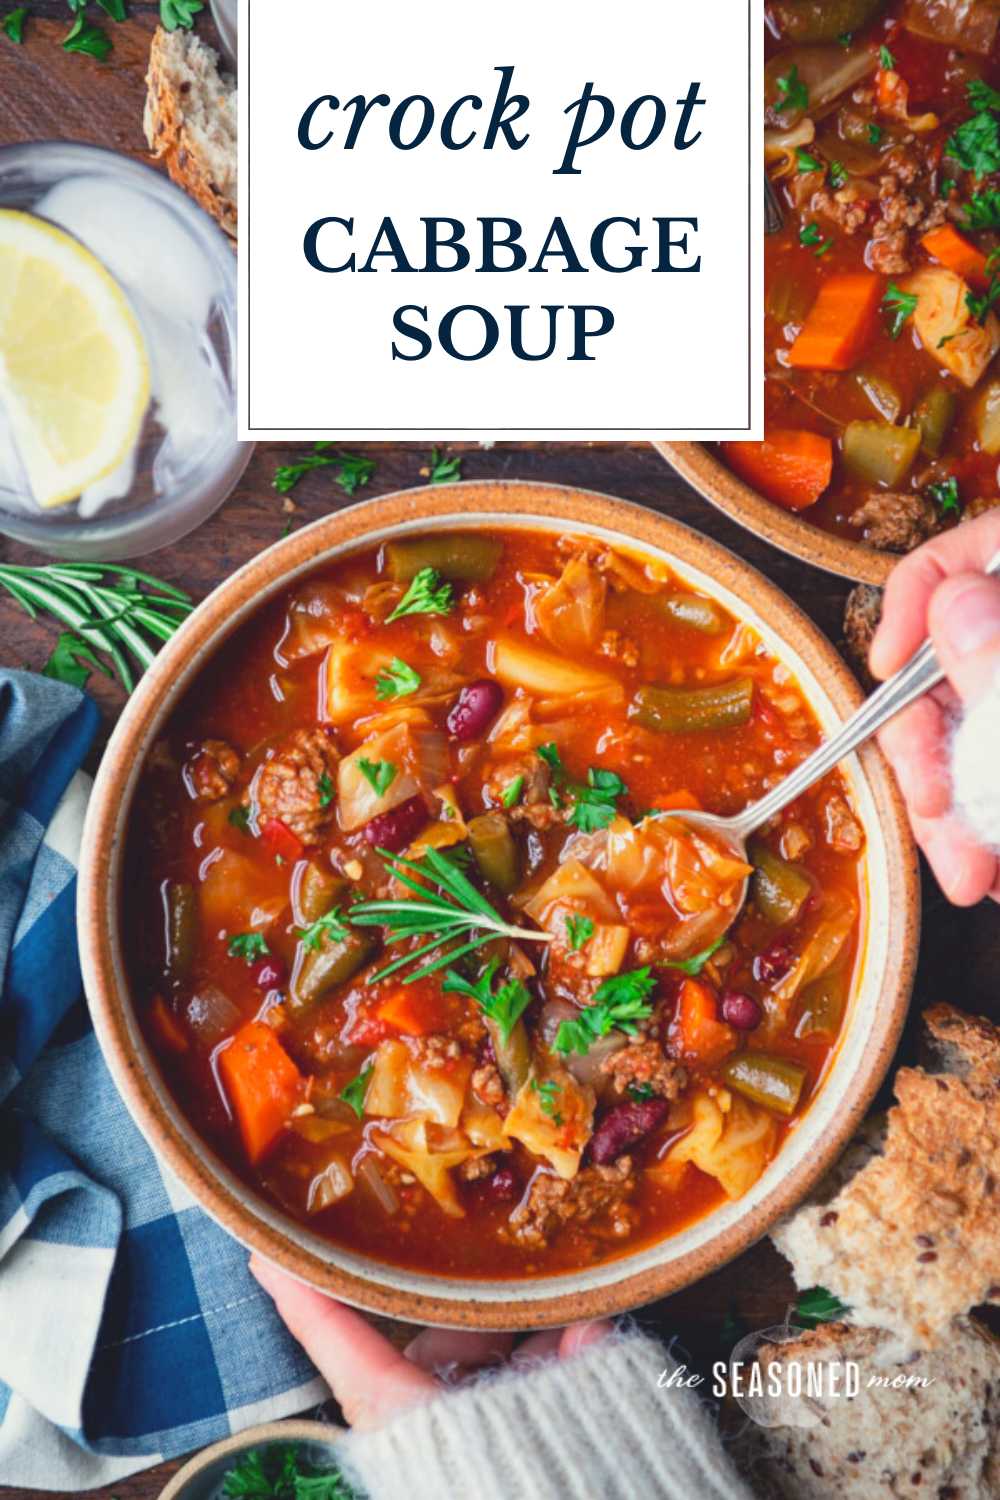 Crockpot cabbage soup with hamburger and text title overlay.